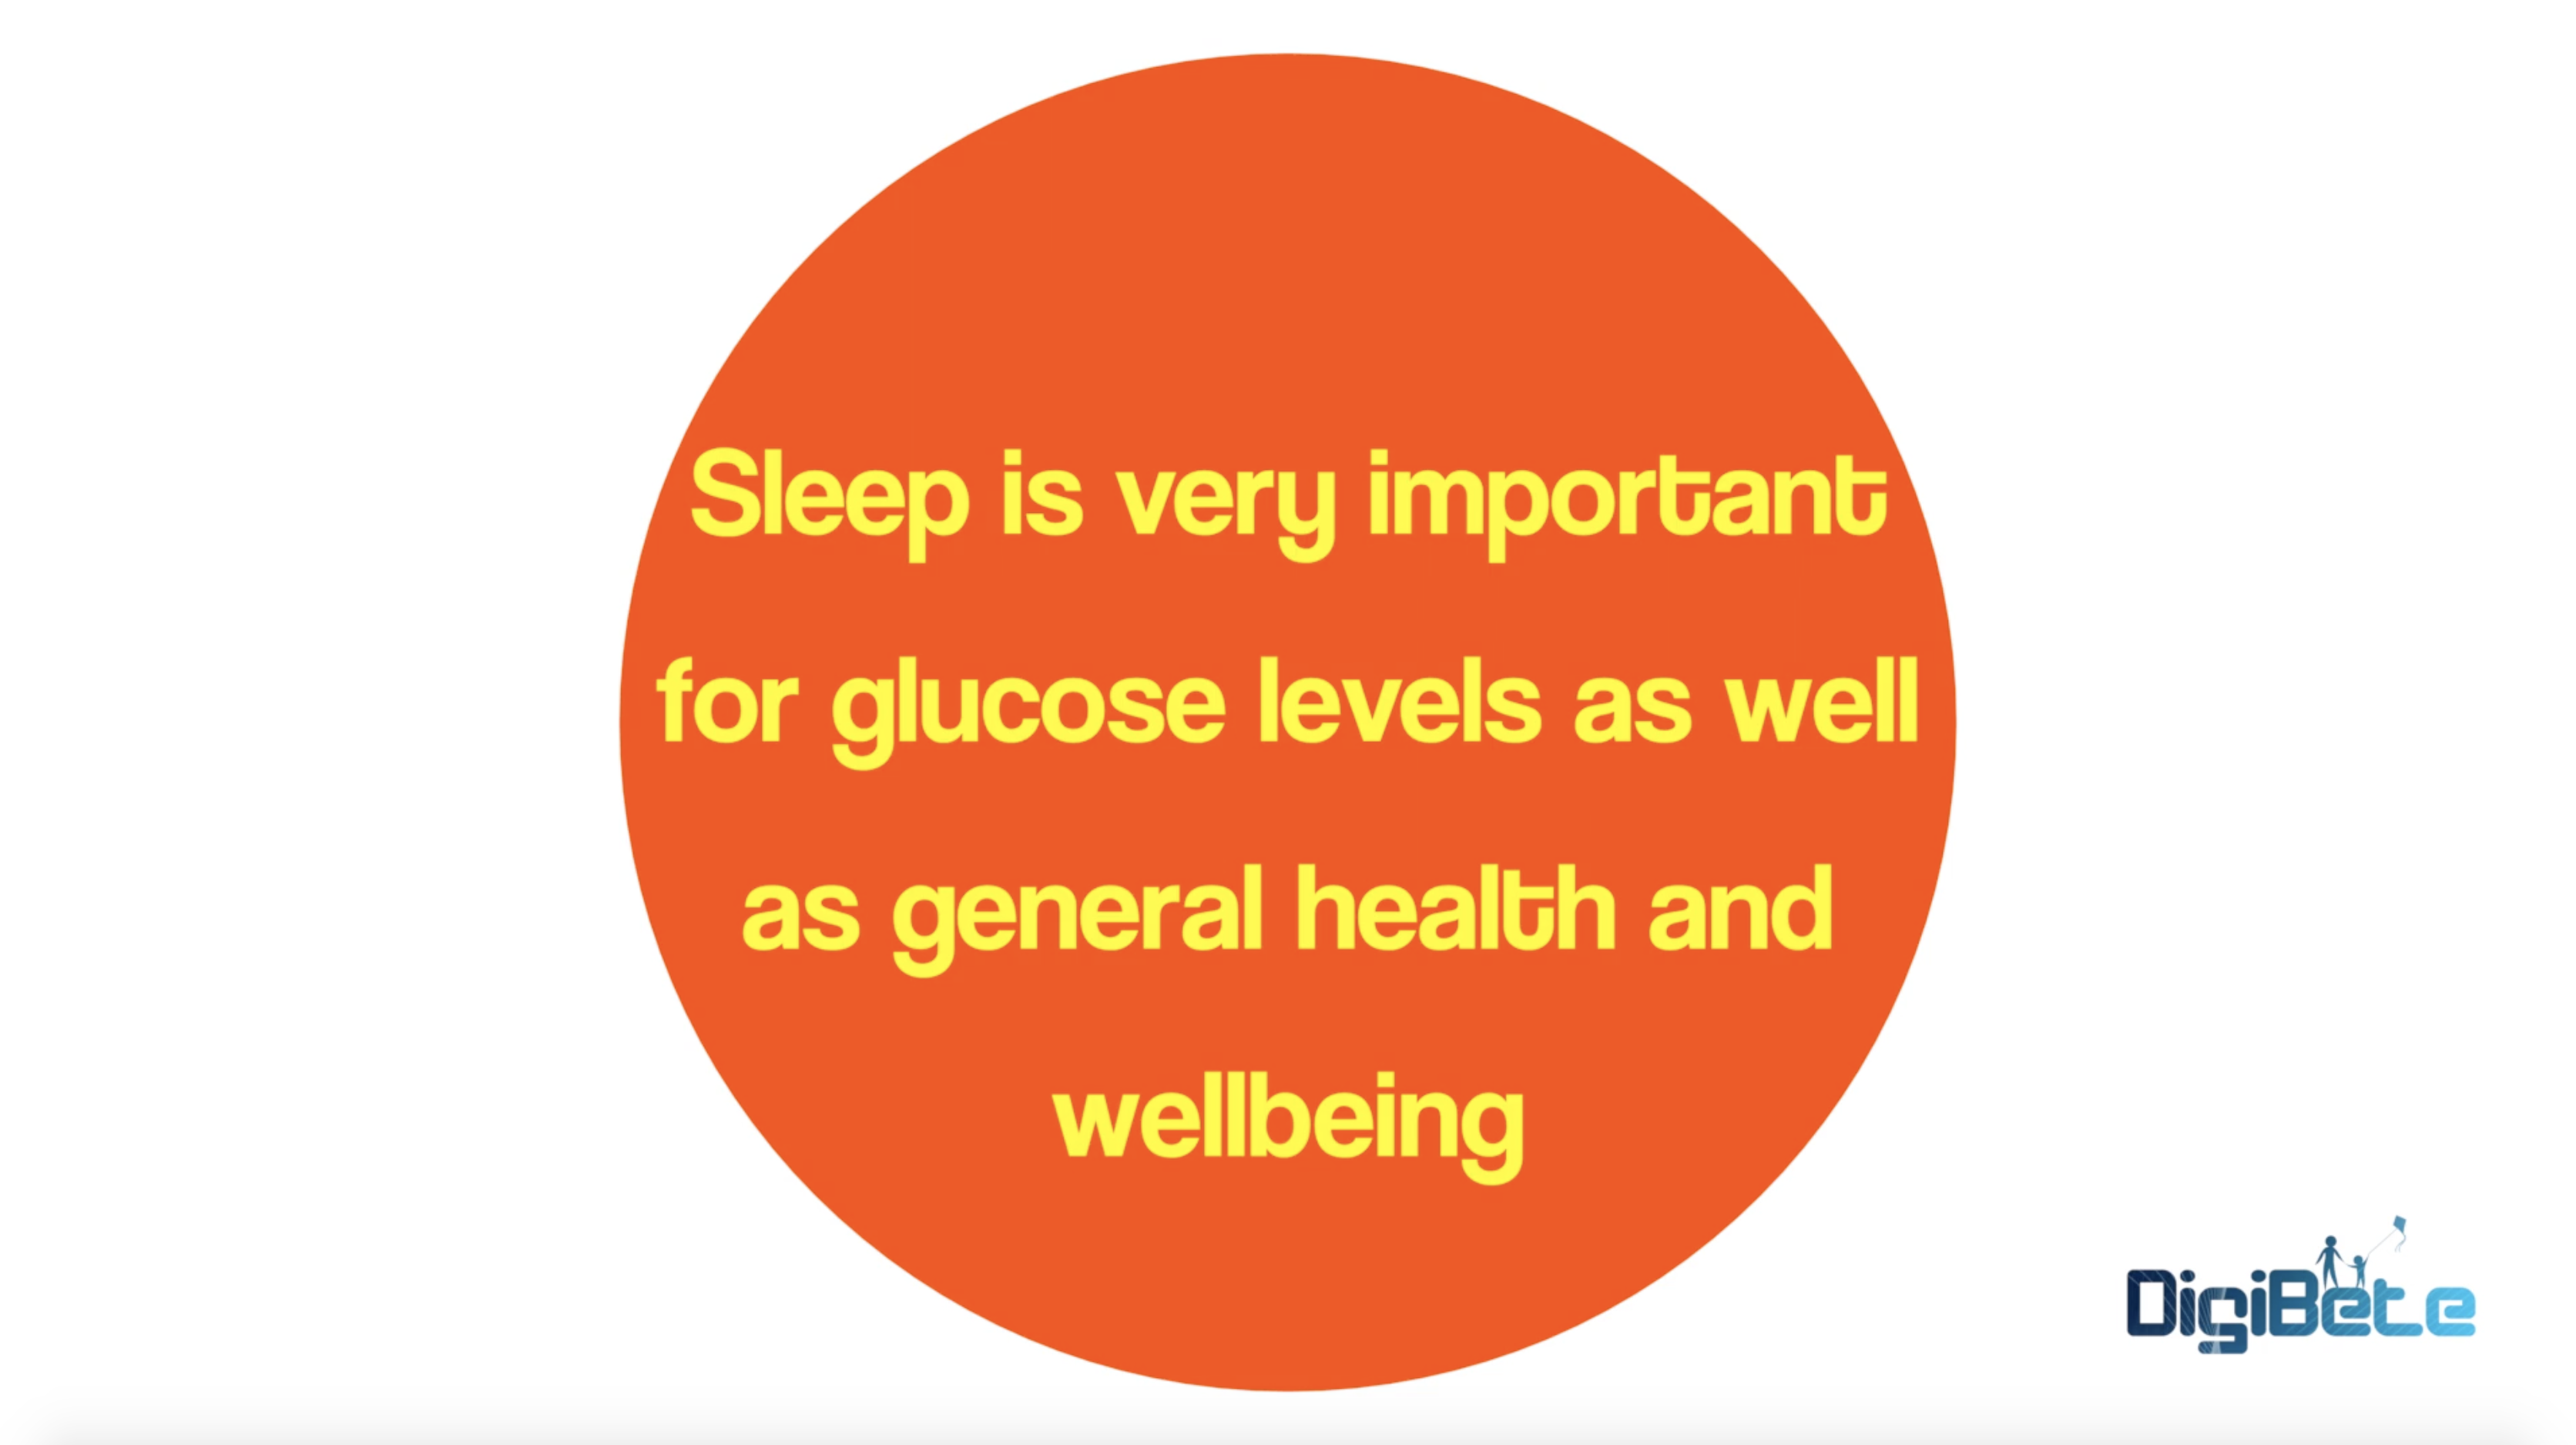 Diabetes Essentials : Sleep is very important for glucose levels as well as general health and wellbeing